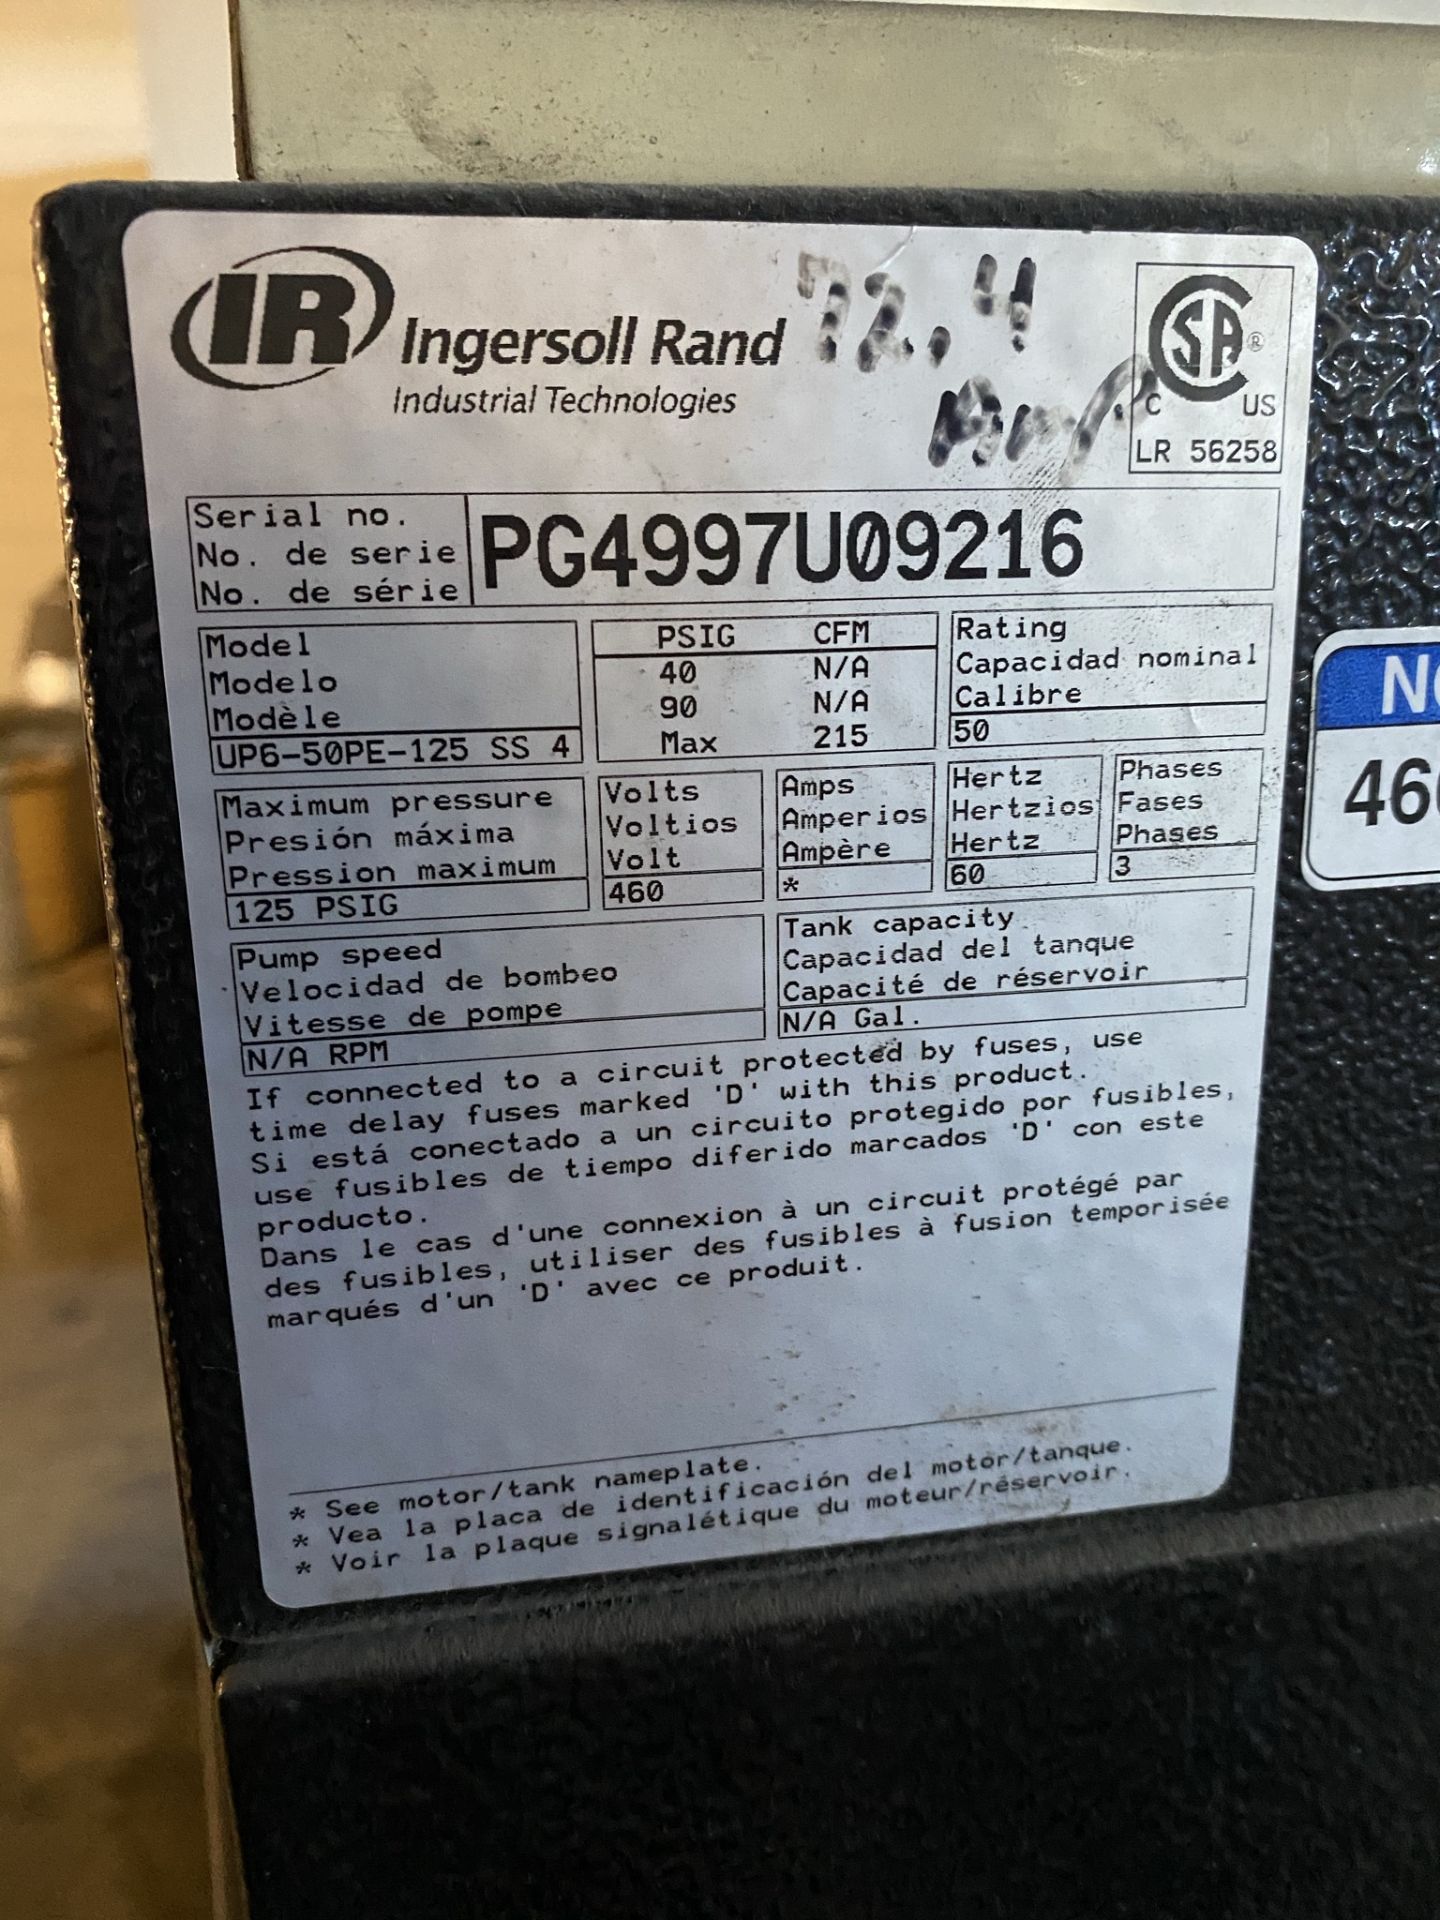 Ingersoll Rand Model UP6-50PE-125 SS 4 Air Compressor with IR Model TS2A Dryer and Silvan Industries - Image 4 of 9